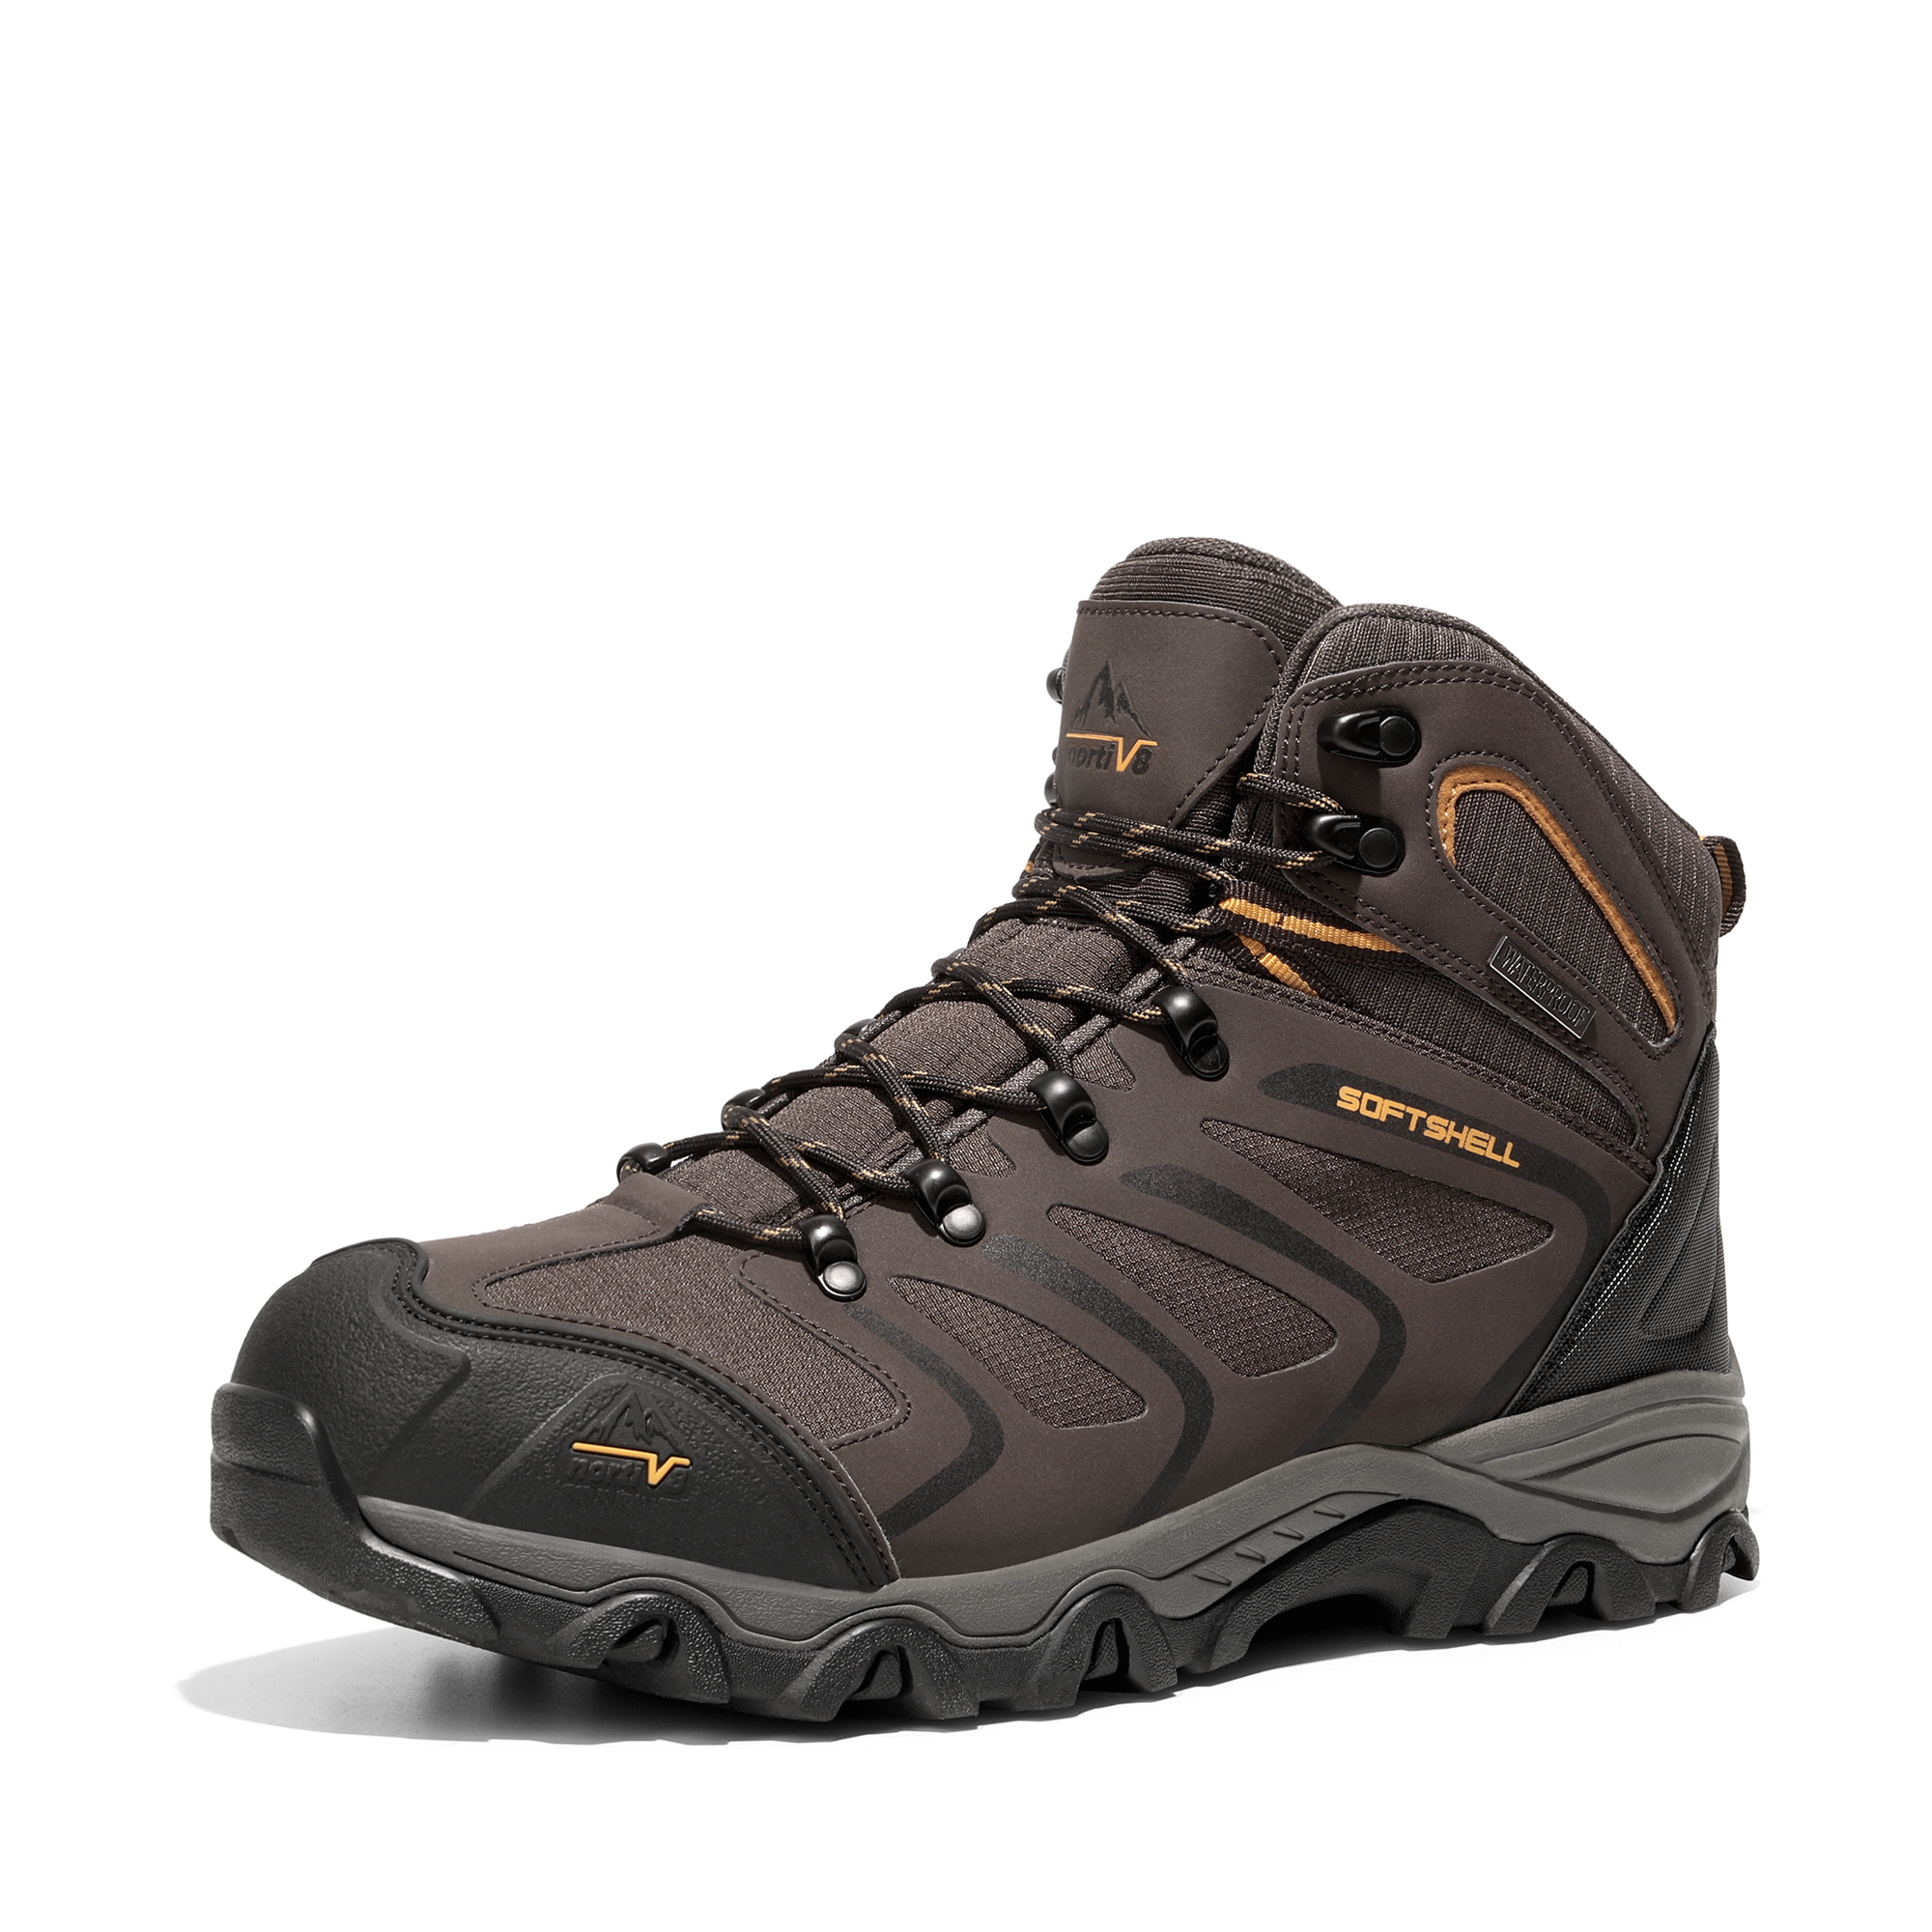 Men's Armadillo Ankle High Waterproof Hiking Boots-Nortiv 8